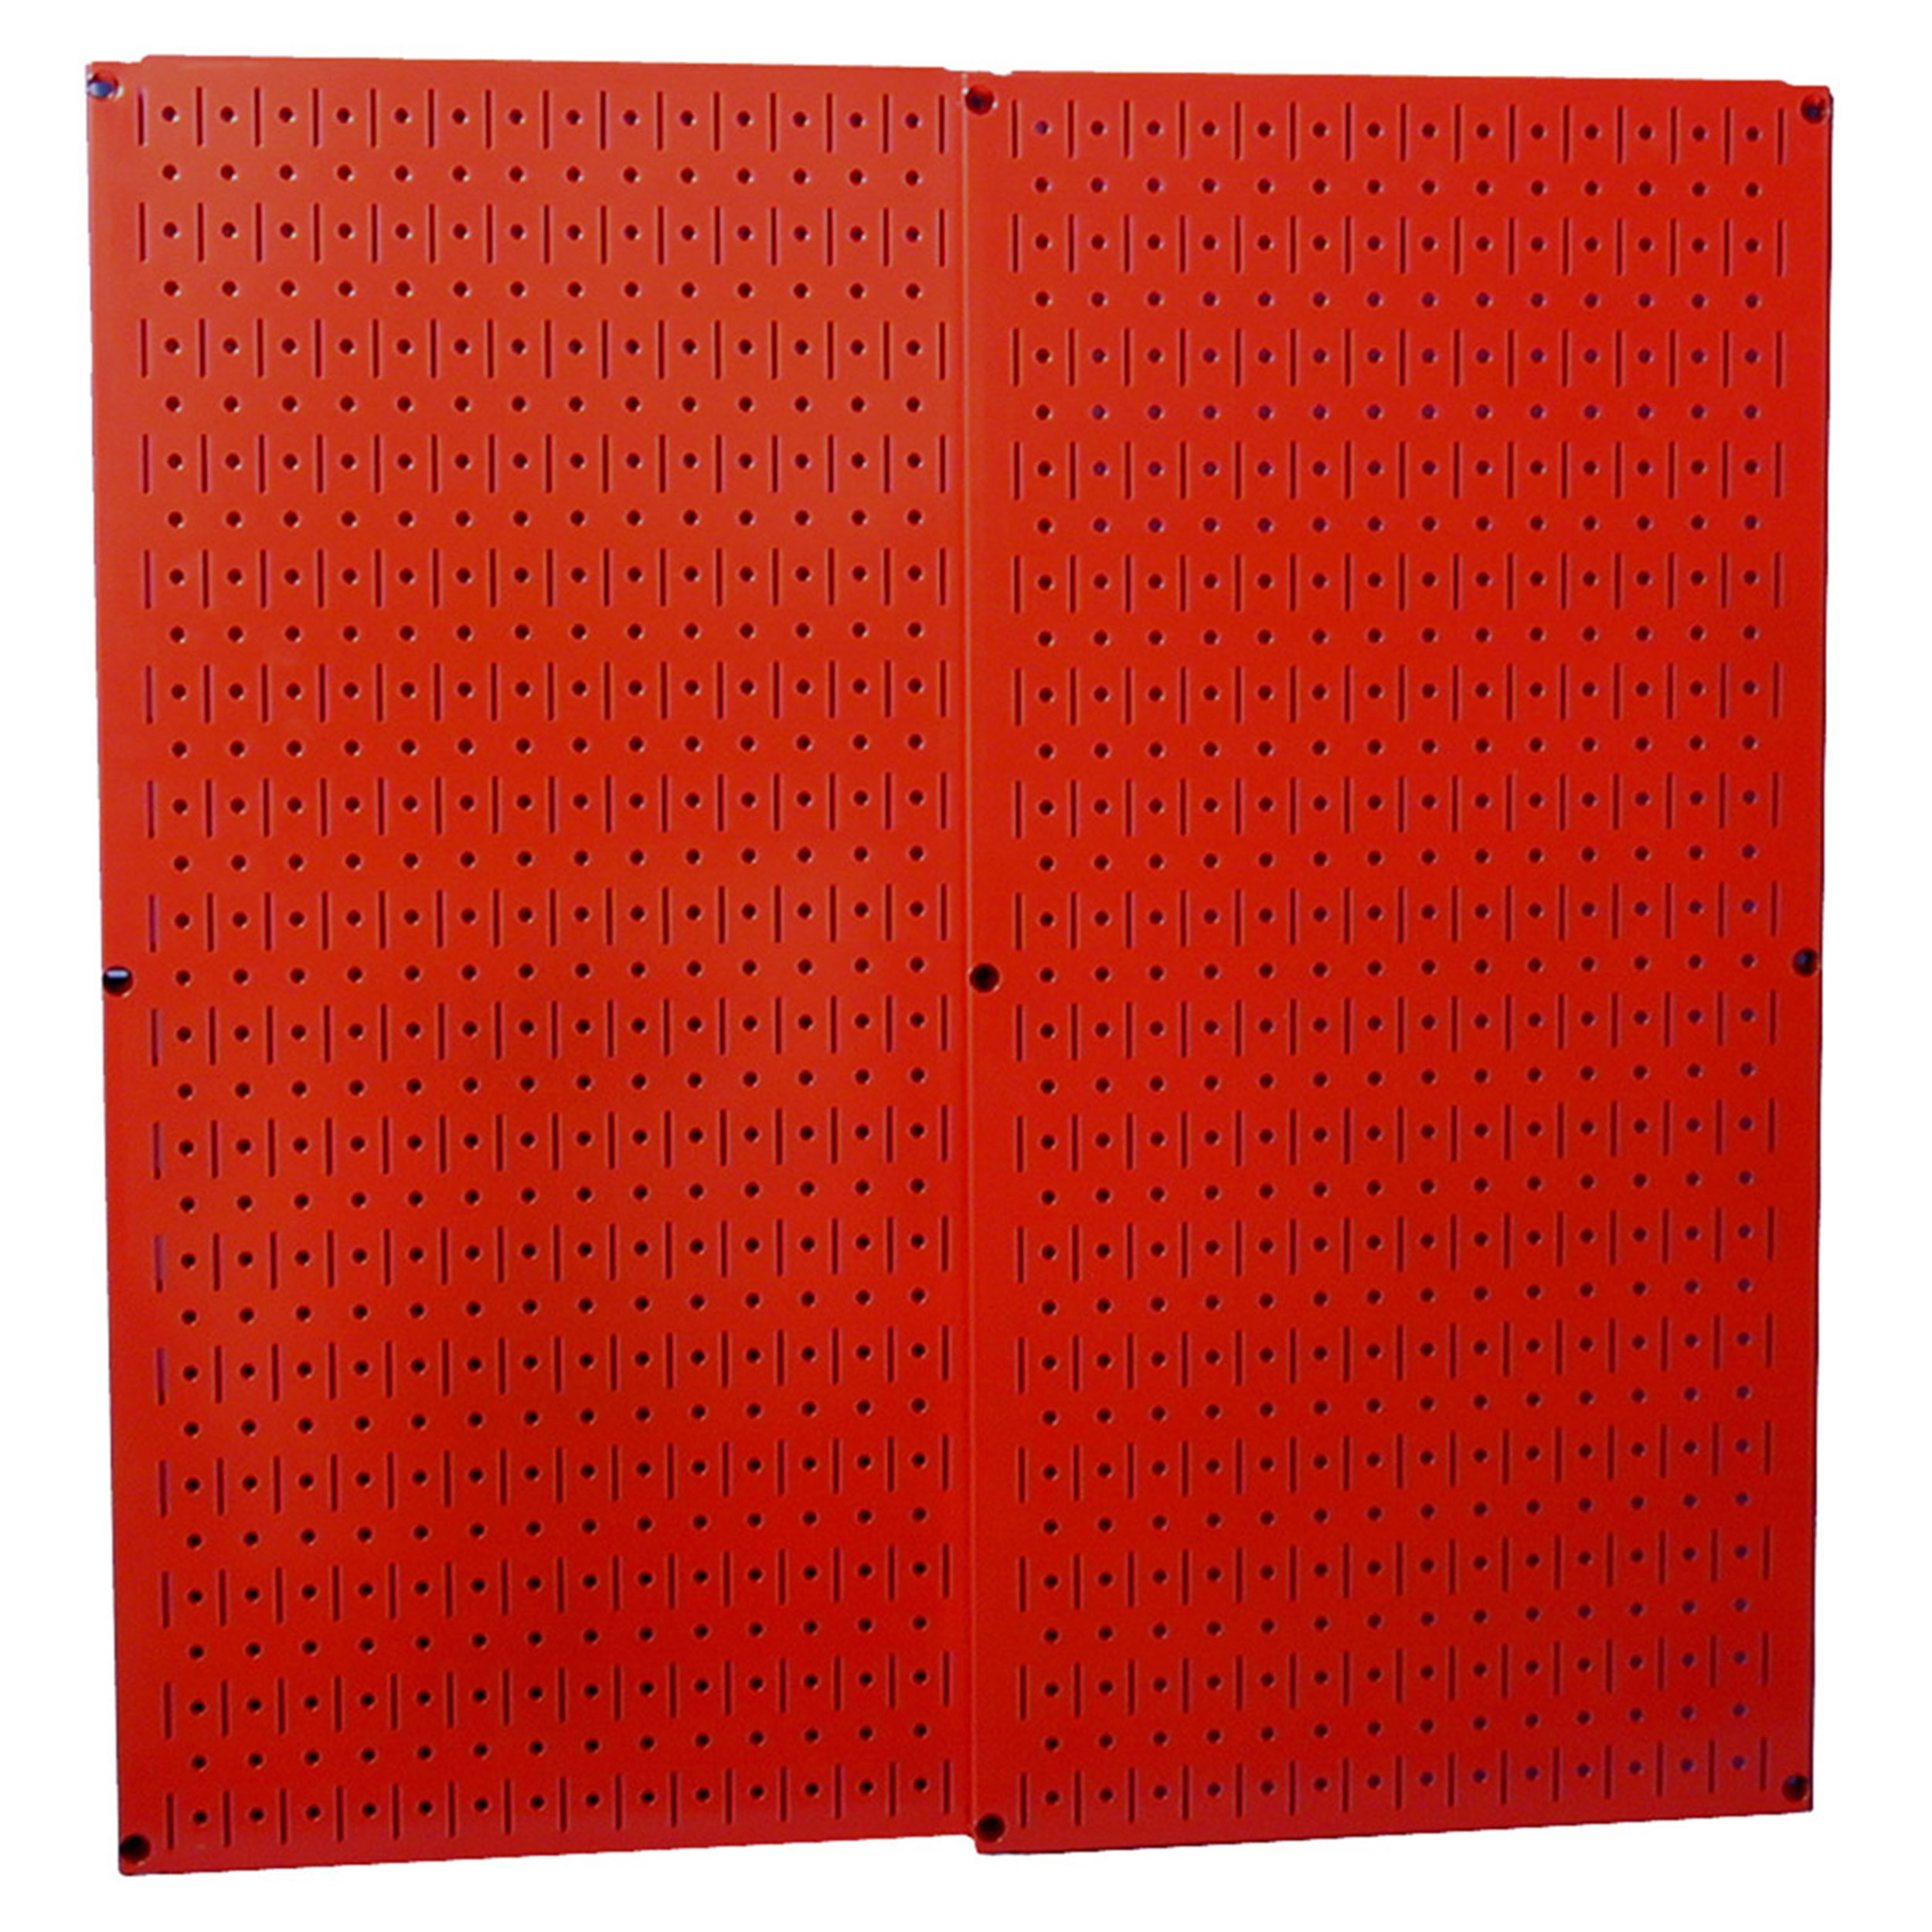 Red Metal Pegboard Pack - Two Pegboard Tool Boards